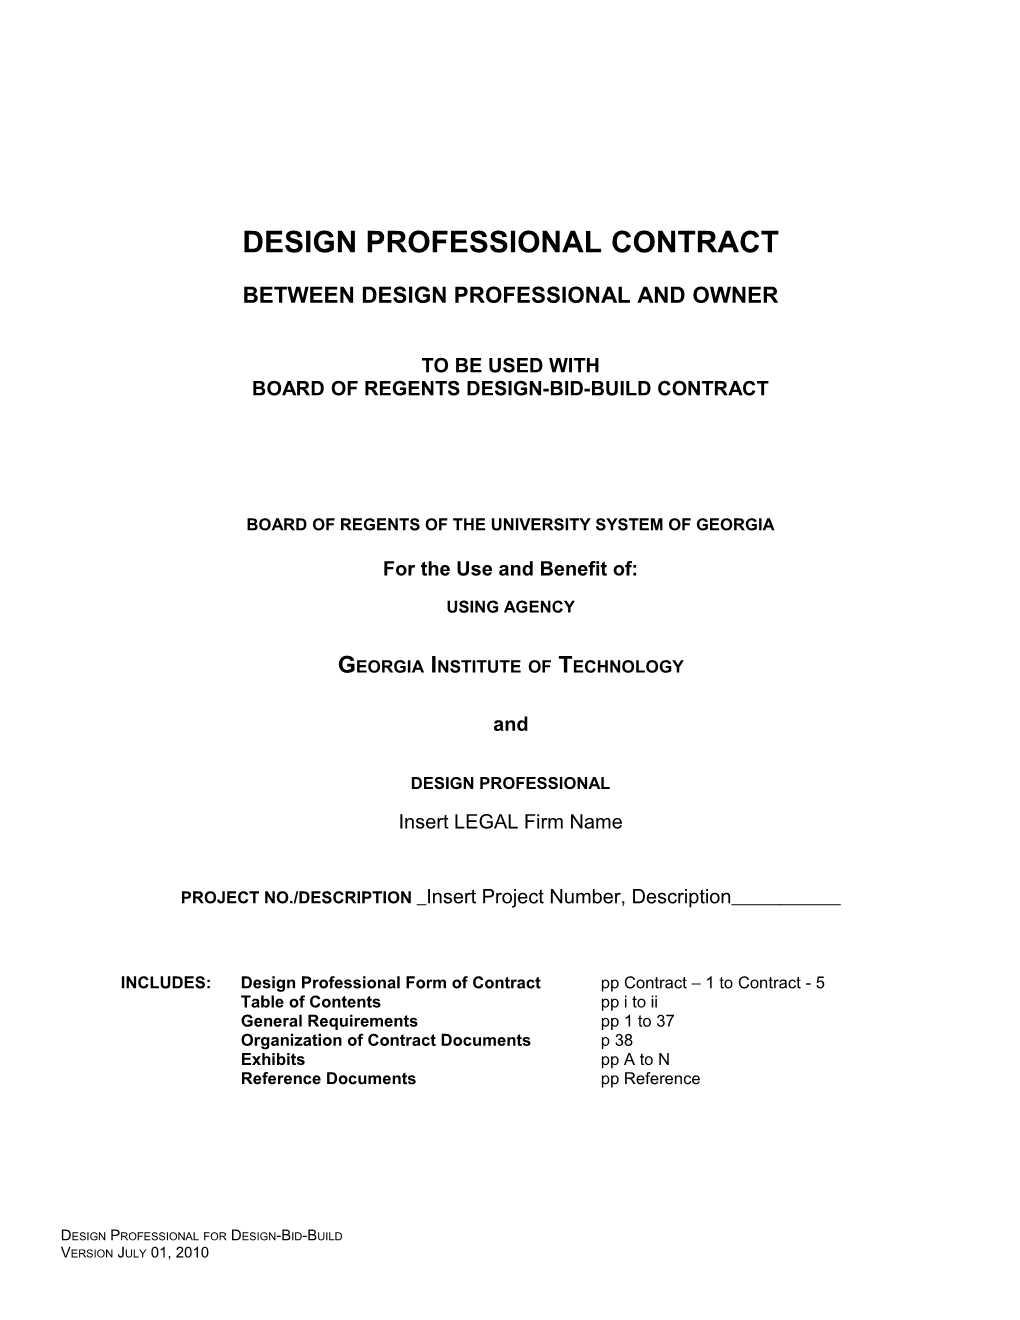 Design Professional Contract 2004